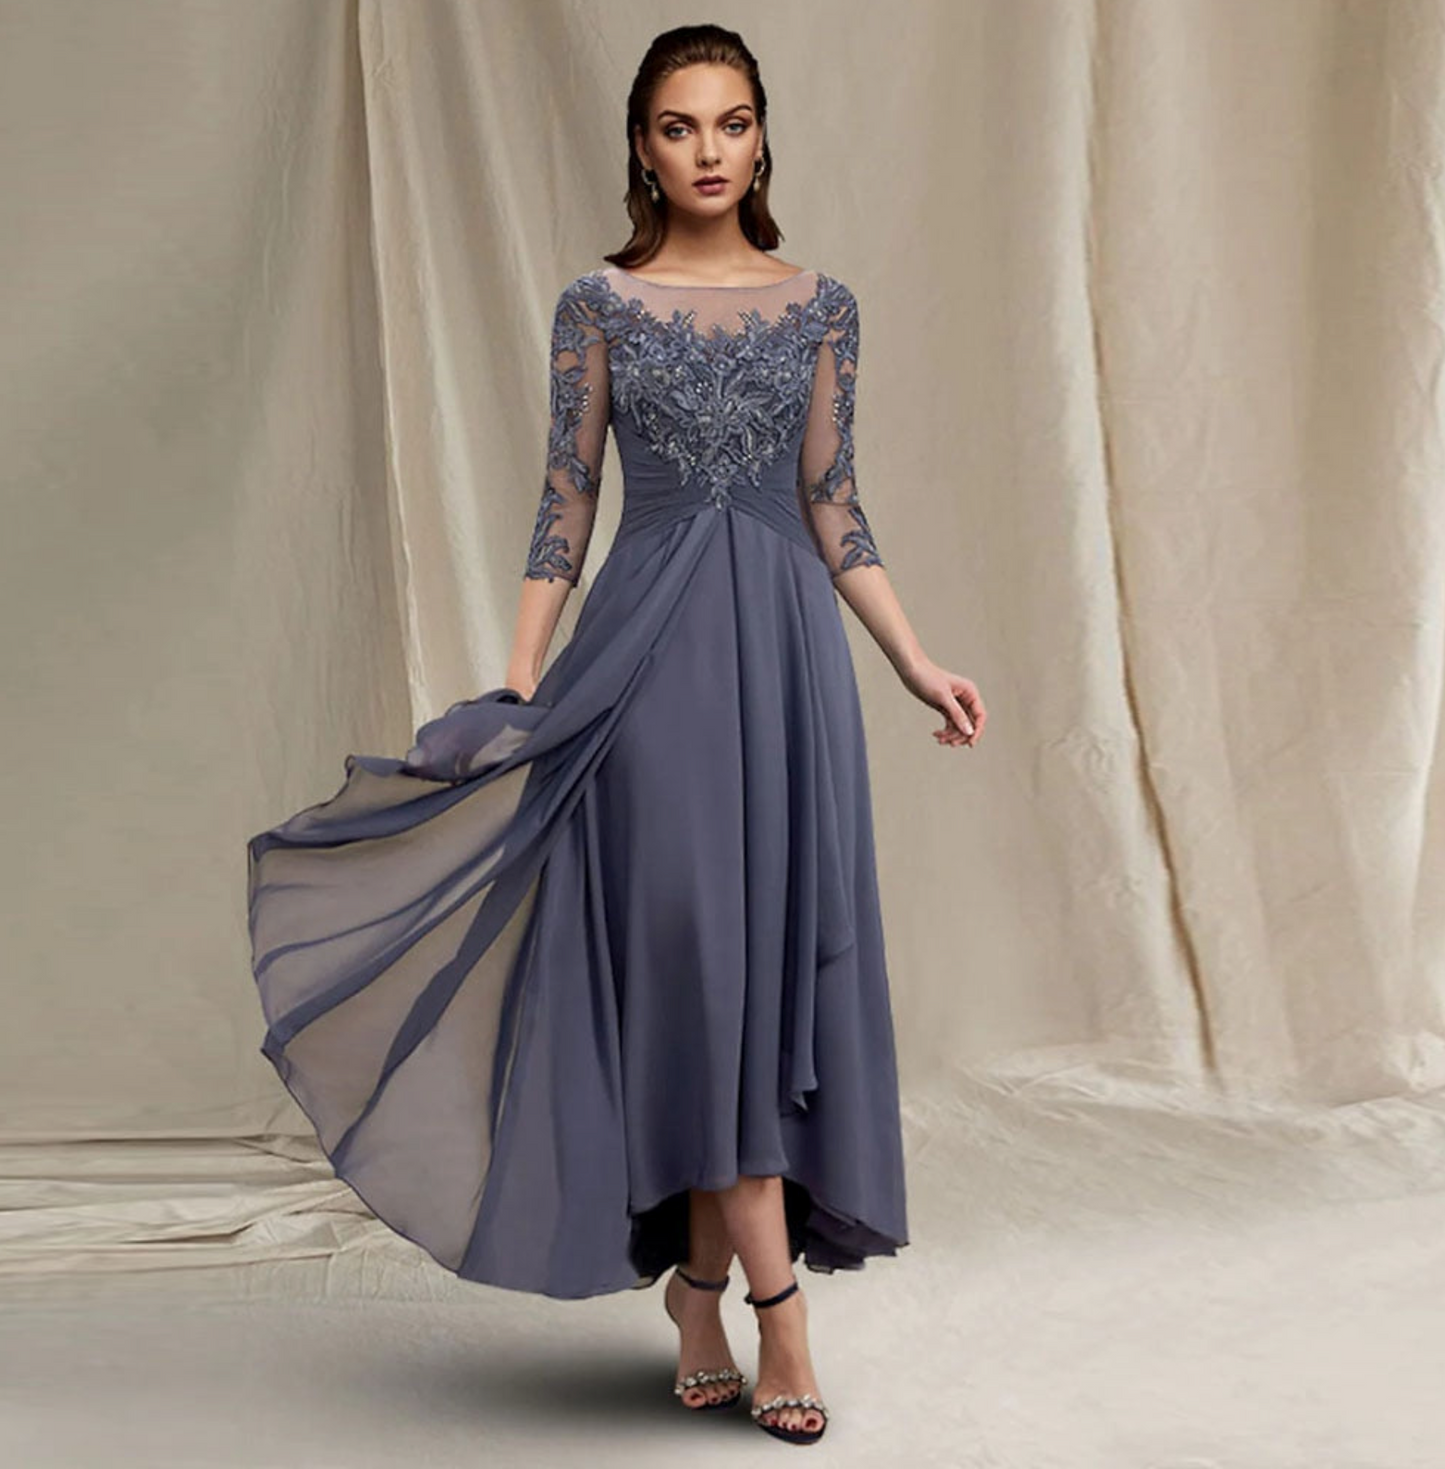 Chiffon Mother of the Bride Dress Lace A-Line Wedding Tea-Length Gown ...